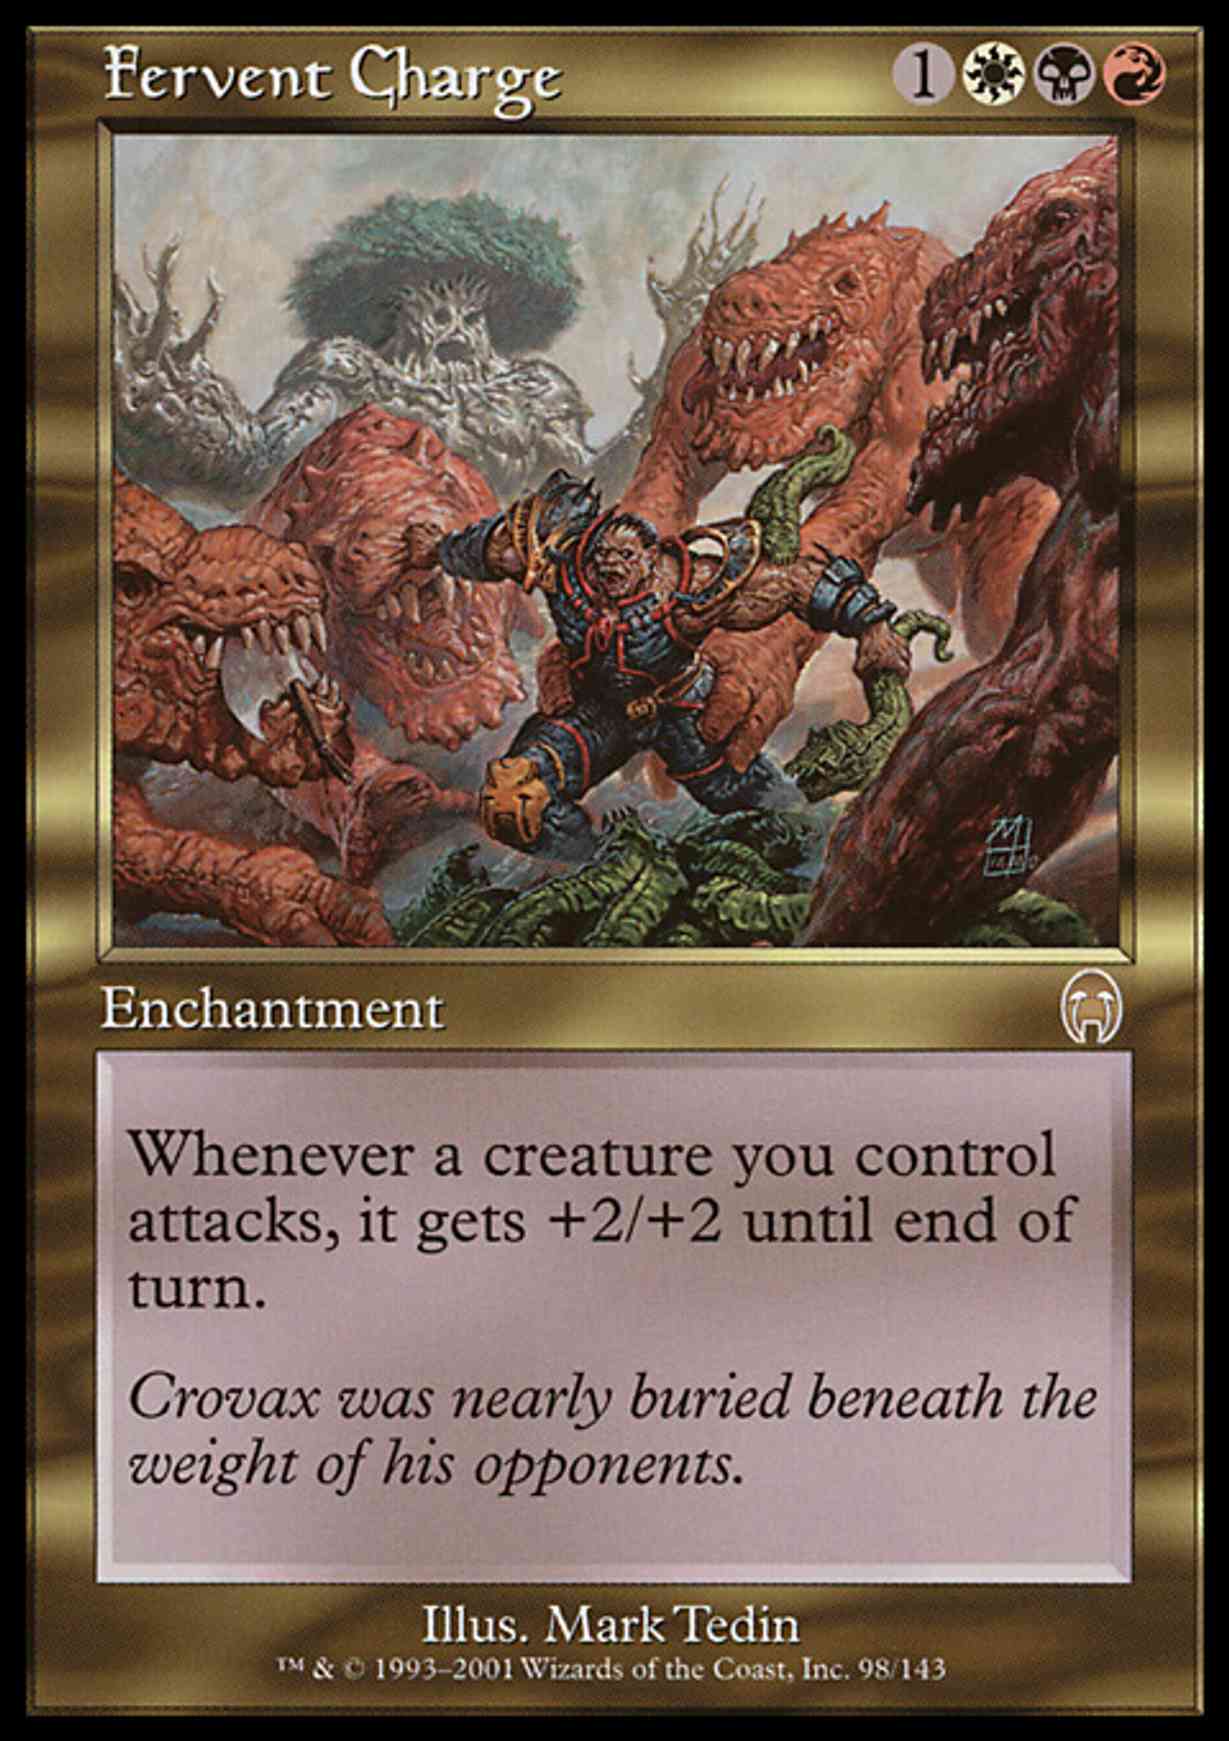 Fervent Charge magic card front